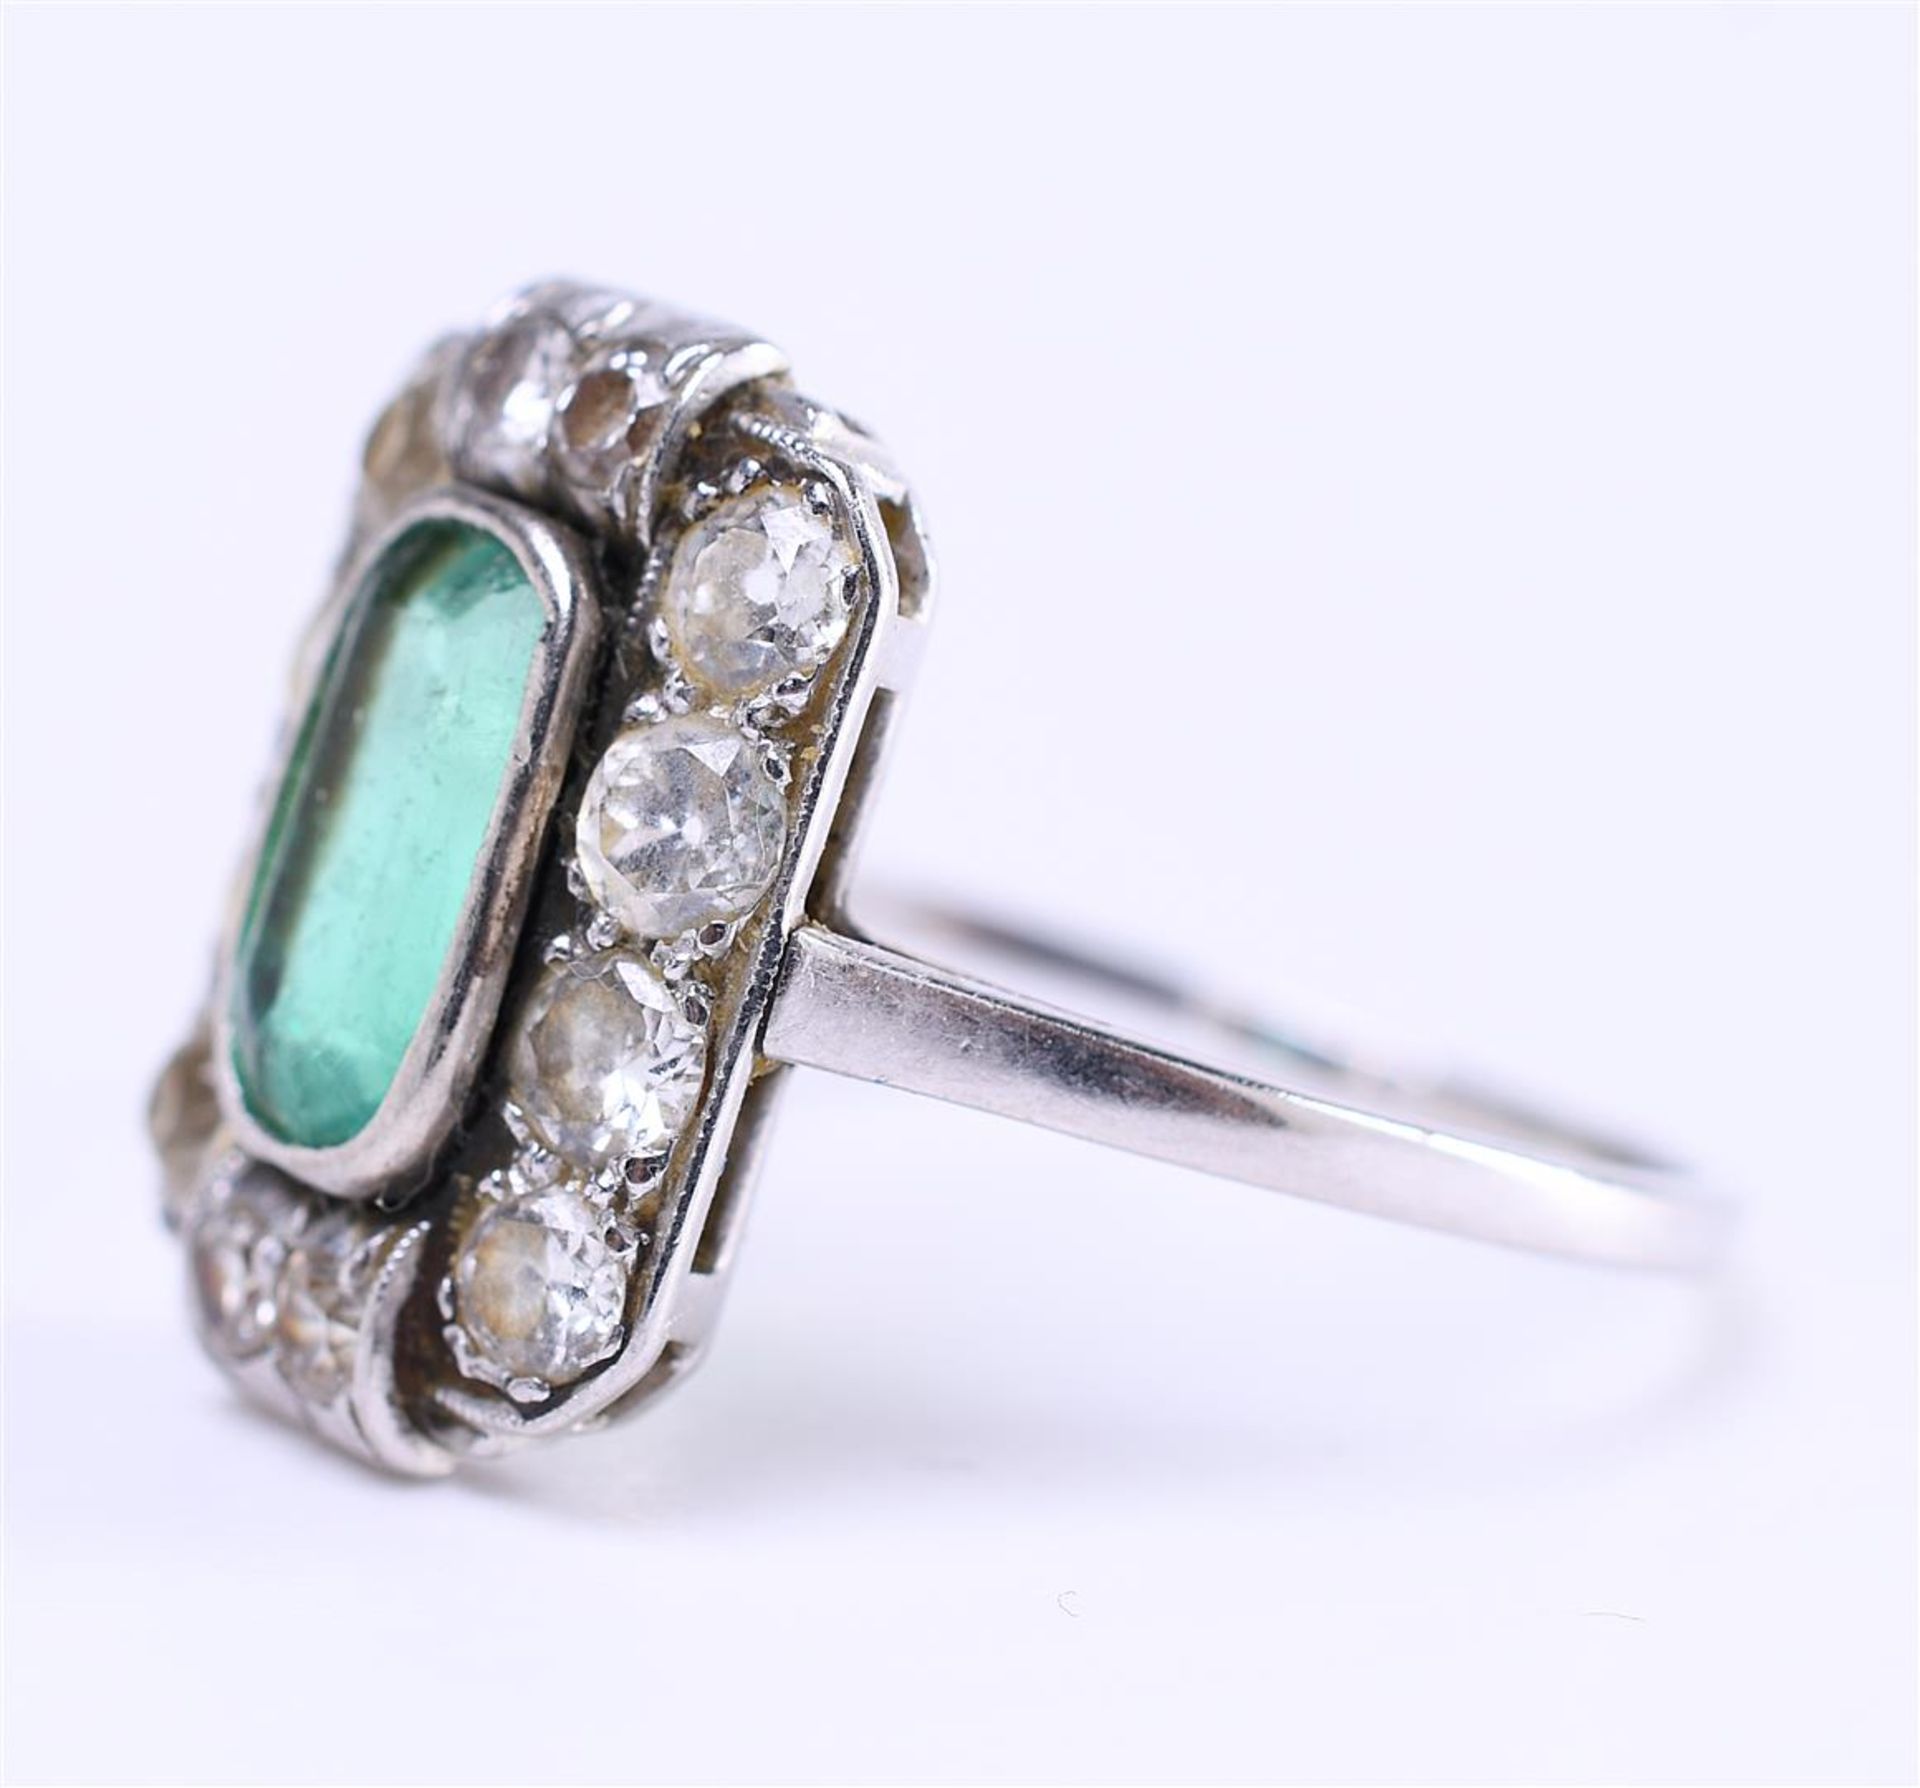 14 carat white gold (rhodium-plated) ring (1970s-80s) set with a synthetic emerald - Bild 3 aus 5